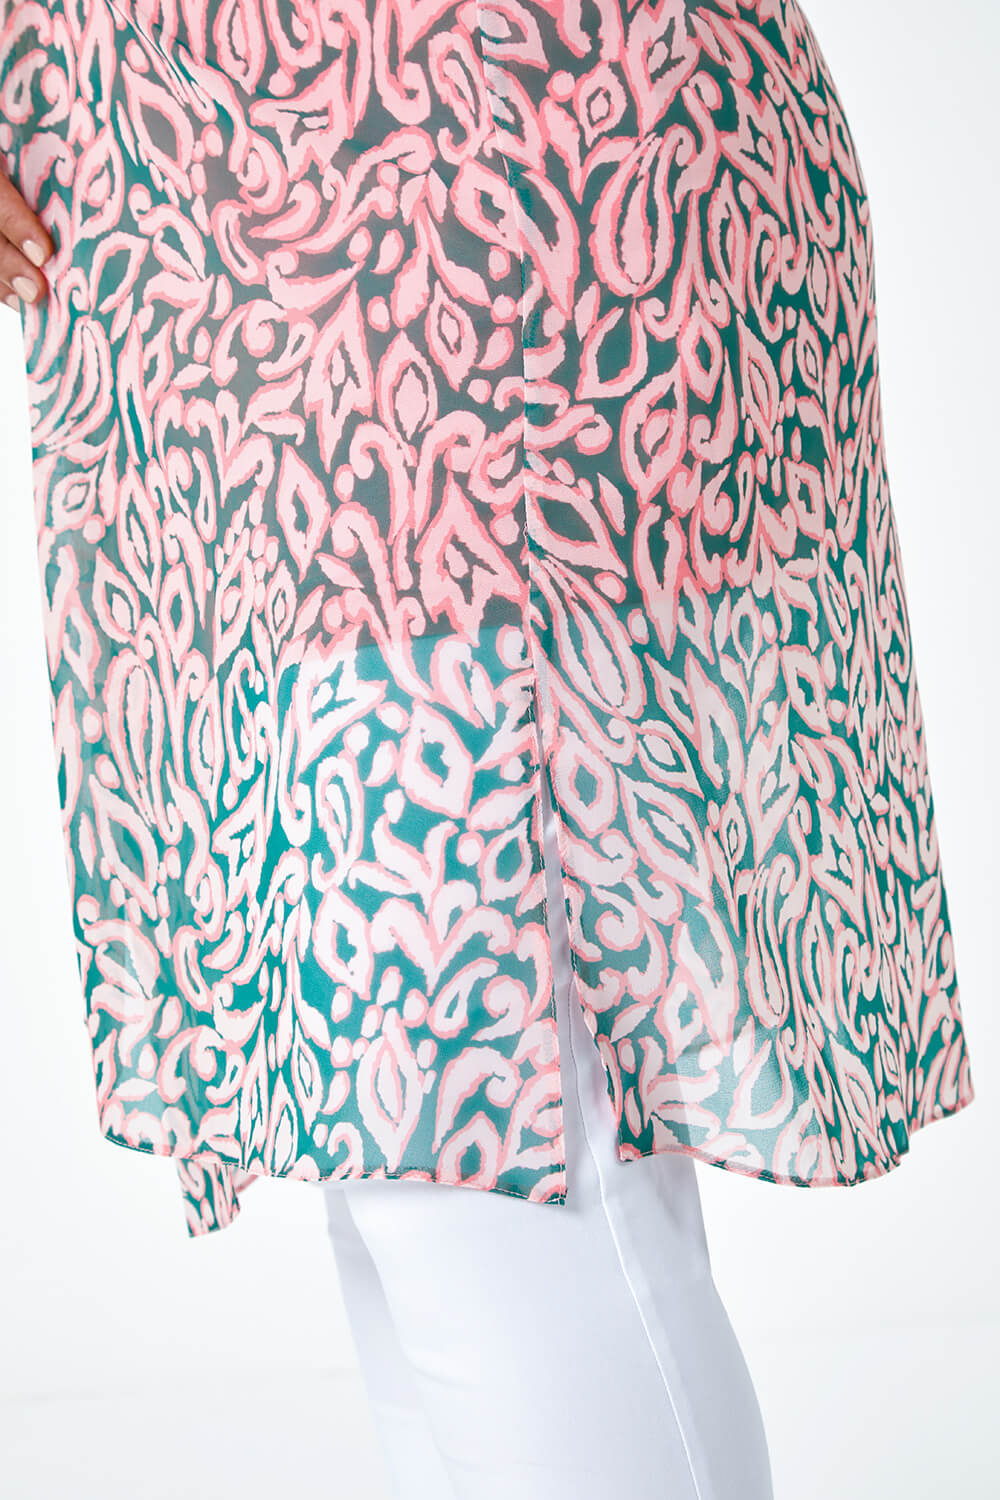 Light Pink Curve 2 in 1 Chiffon Overlay Jersey Top, Image 5 of 5